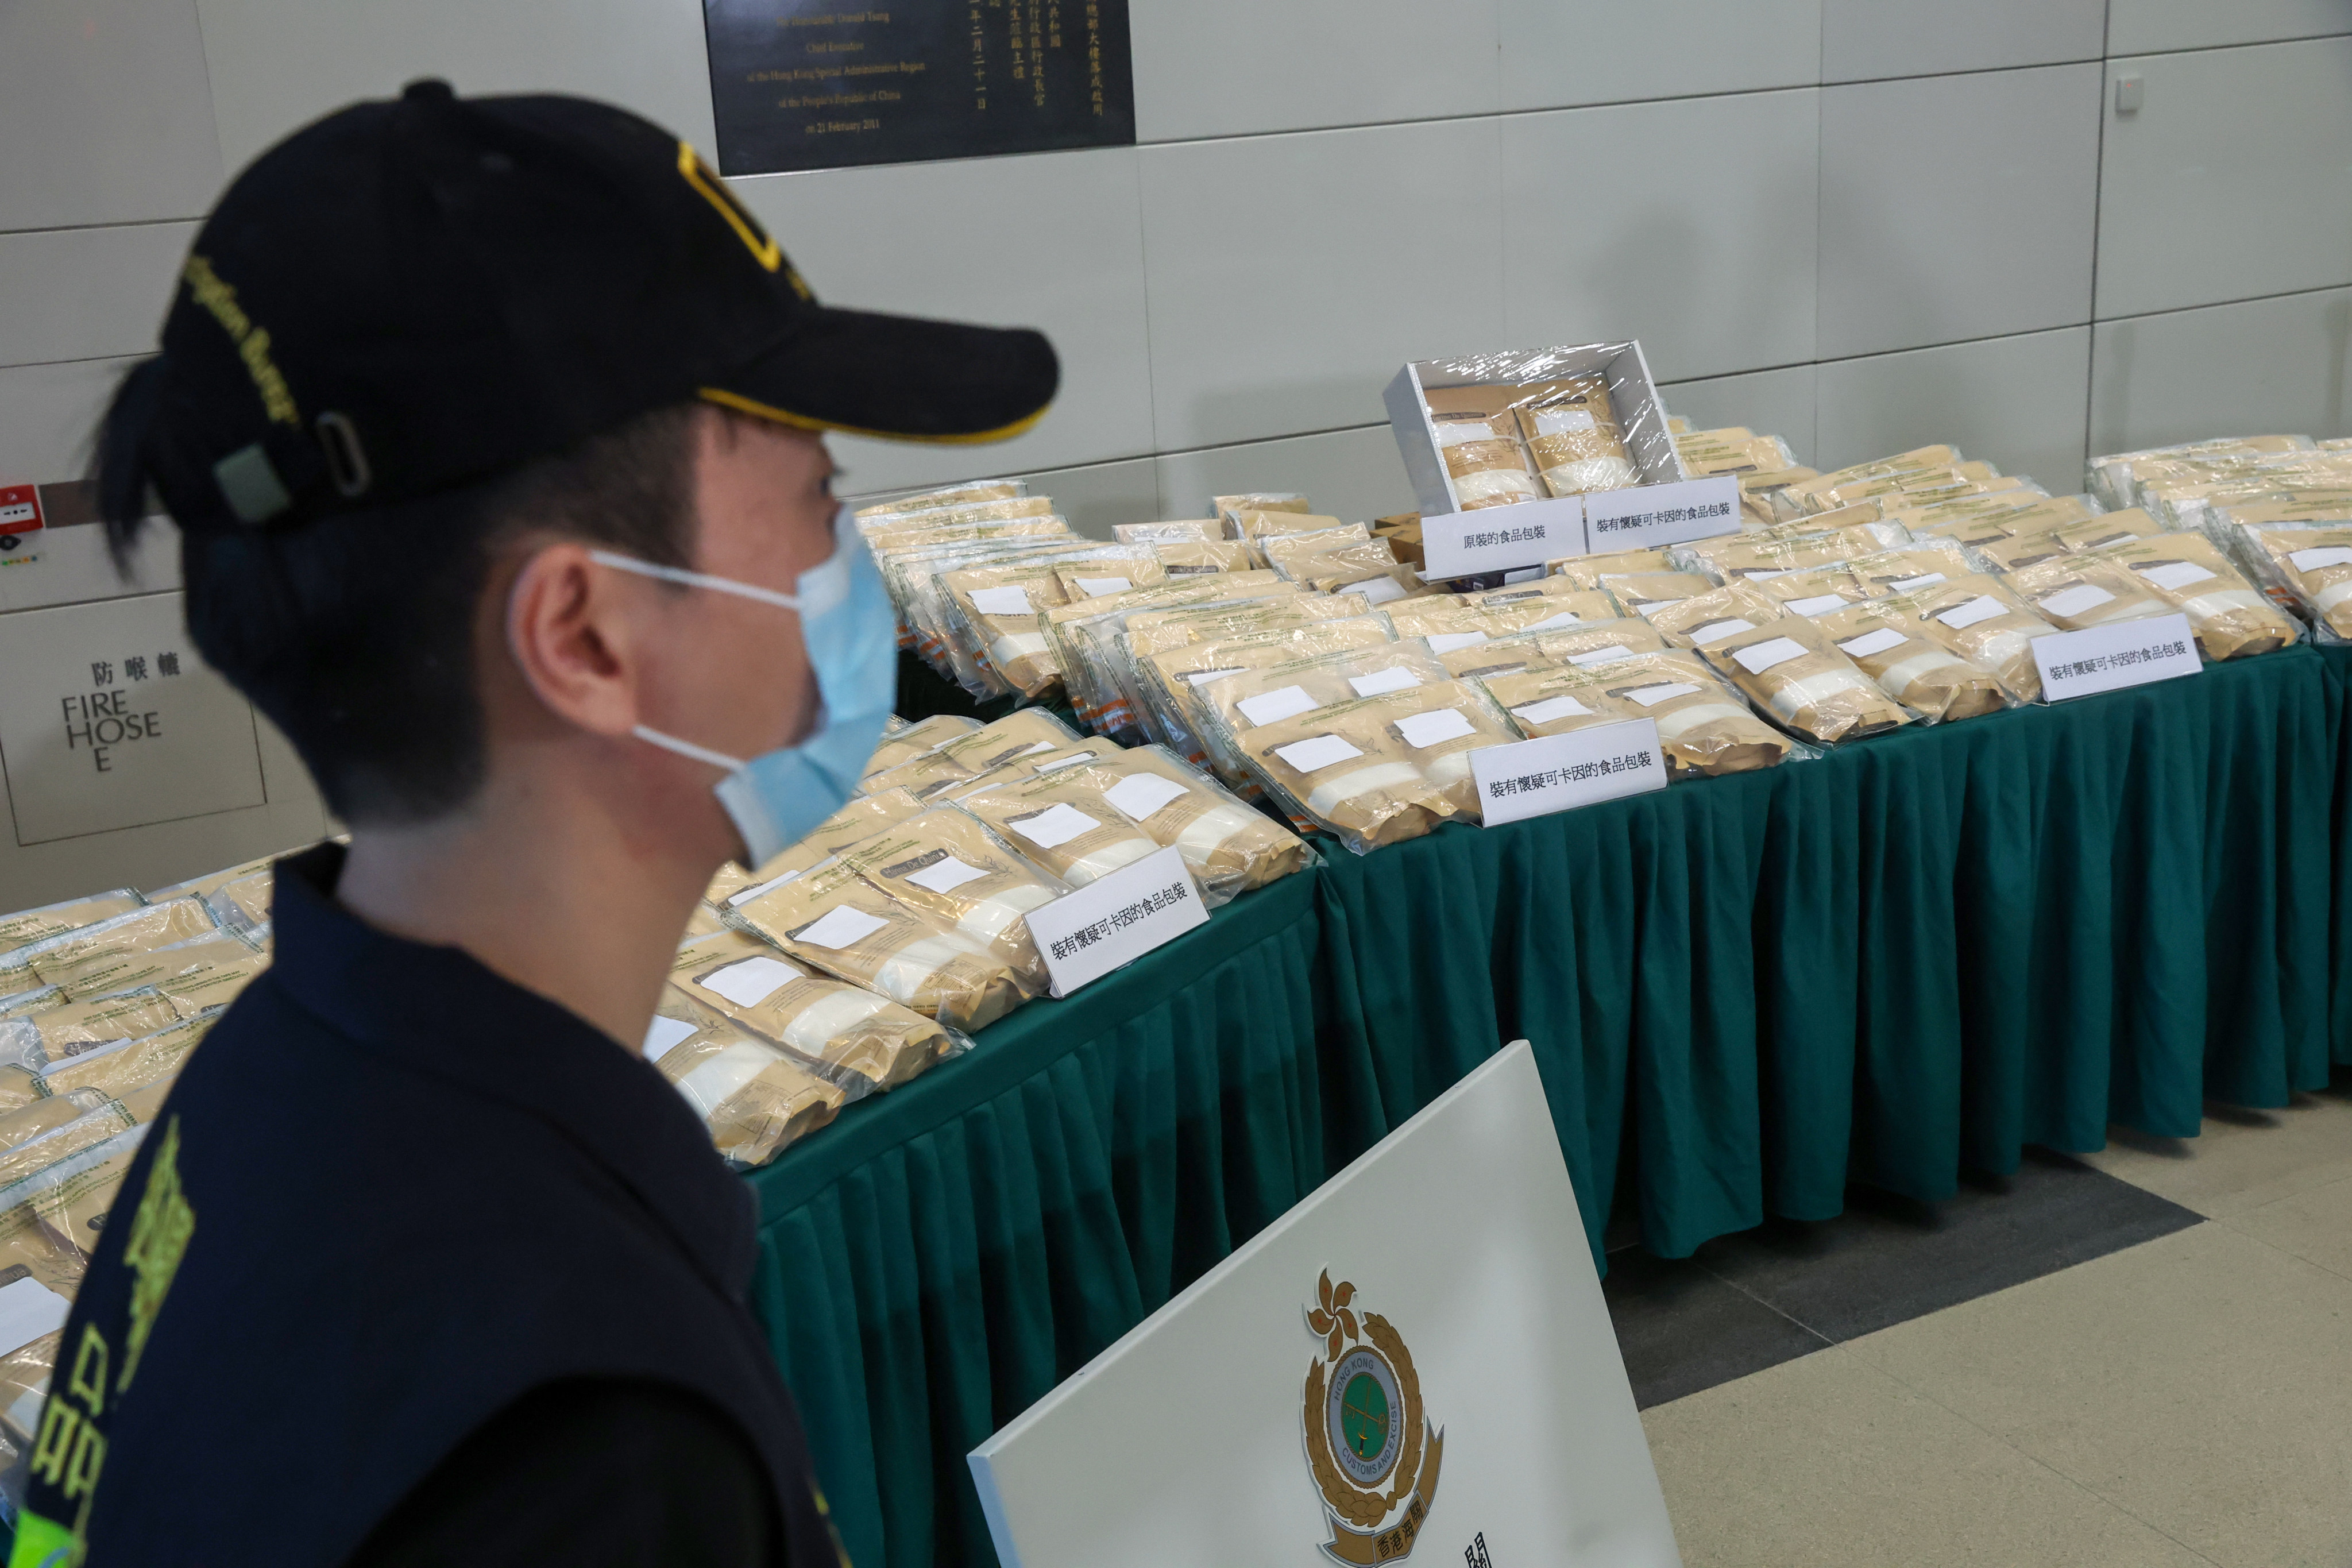 Customs has warned of drug cartels changing tactics to evade law enforcement and smuggle narcotics. Photo: Edmond So